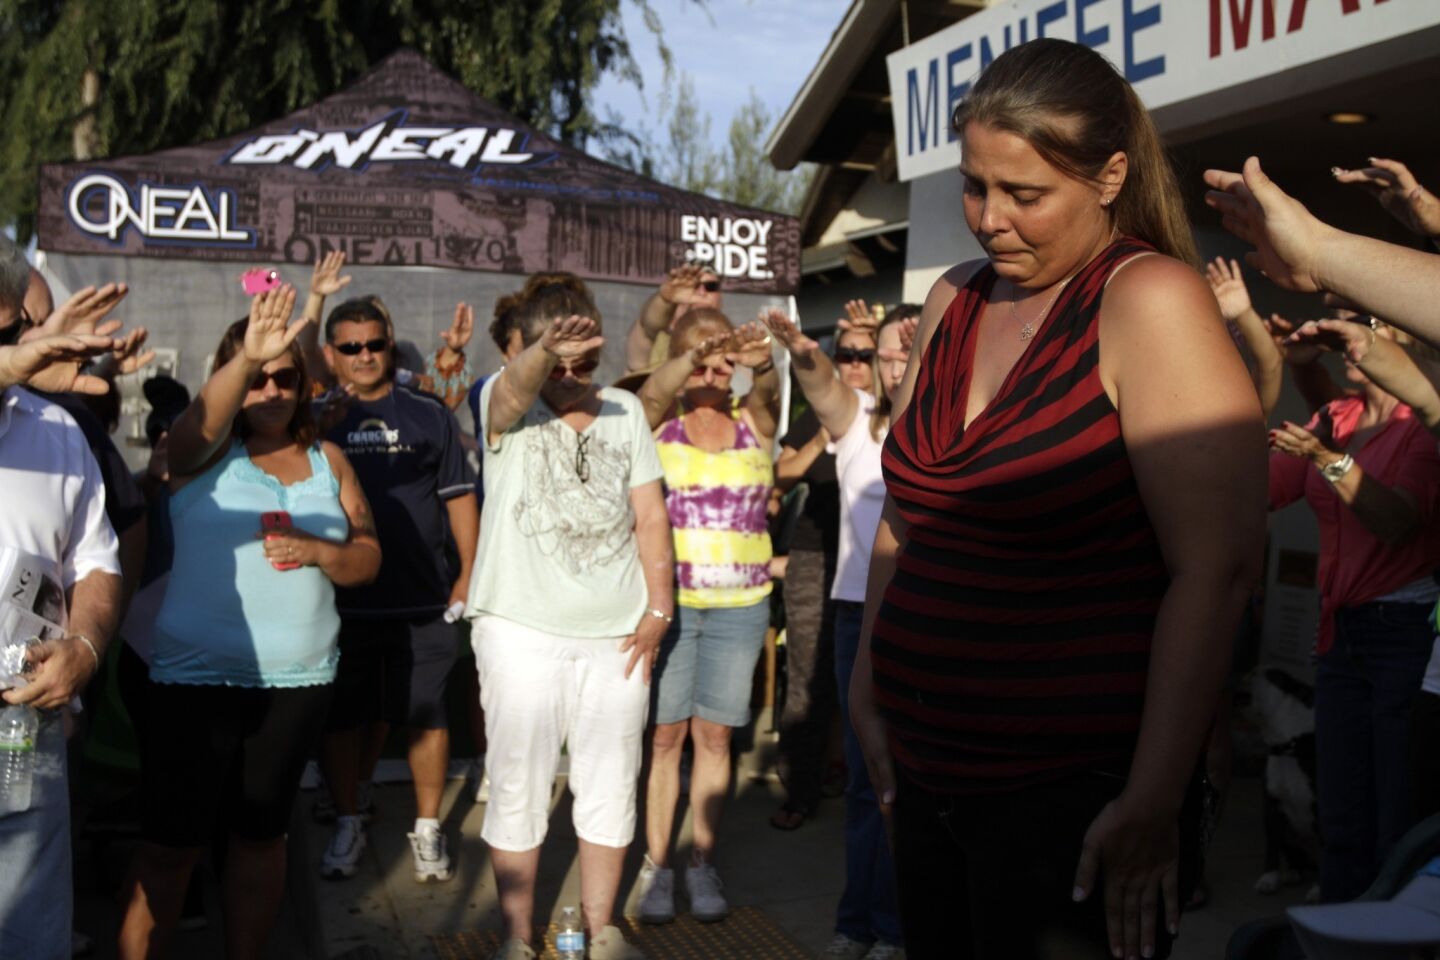 Becca Smith, the mother of Terry Dewayne Smith, is surrounded by friends and neighbors during a prayer session at the volunteer center in Menifee. Terry Dewayne Smith, an 11-year-old autistic boy remains missing, despite the efforts of more than 100 volunteers and emergency workers who combed the hills of Menifee looking for the child.